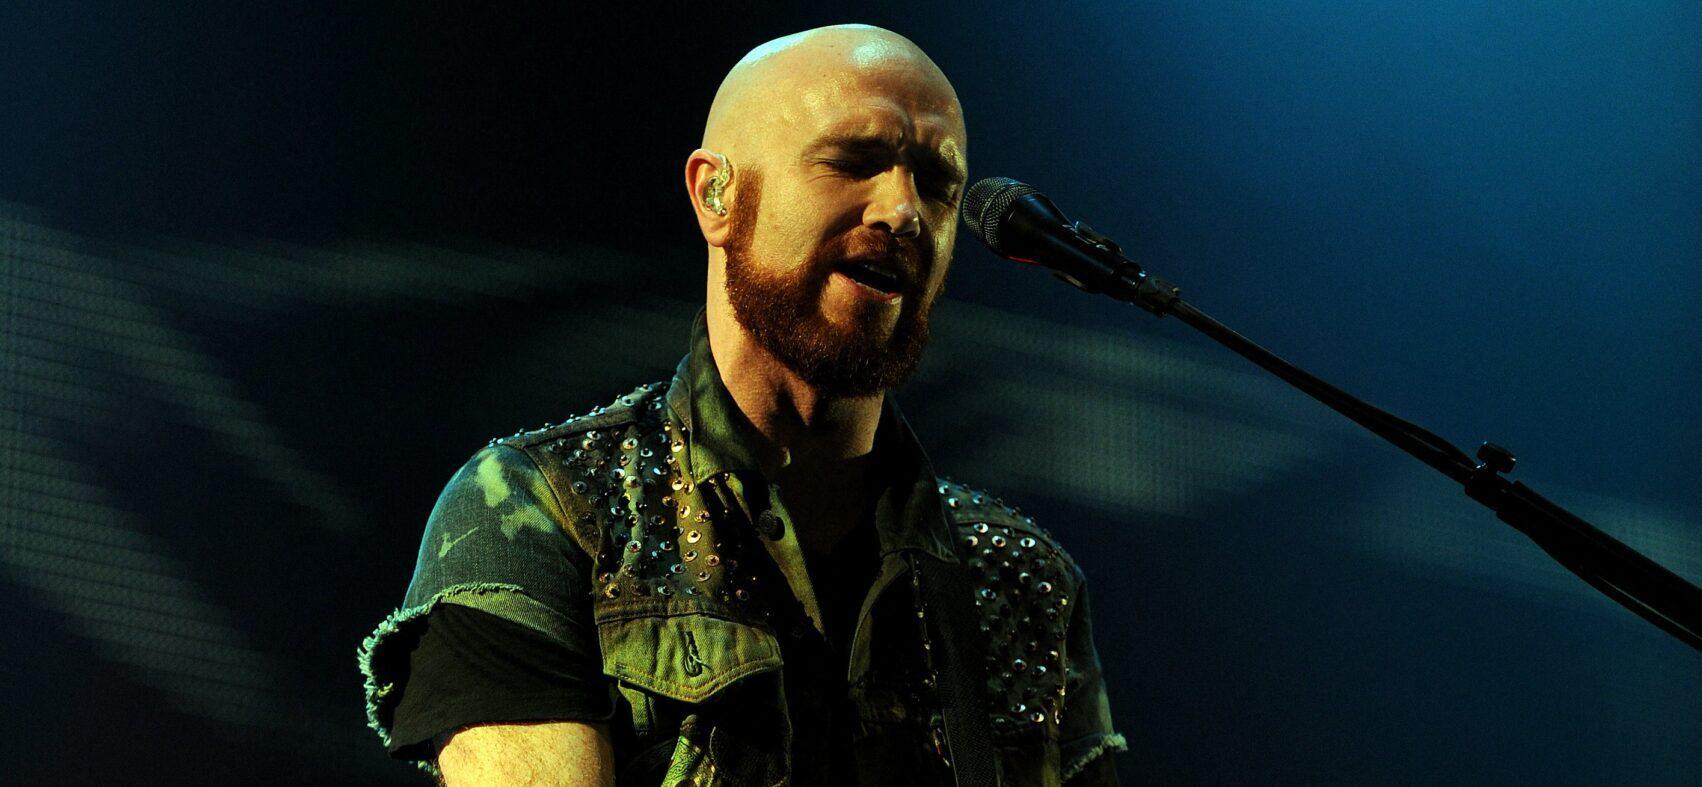 Mark Sheehan, Guitarist For The Script, Dies Suddenly at 46